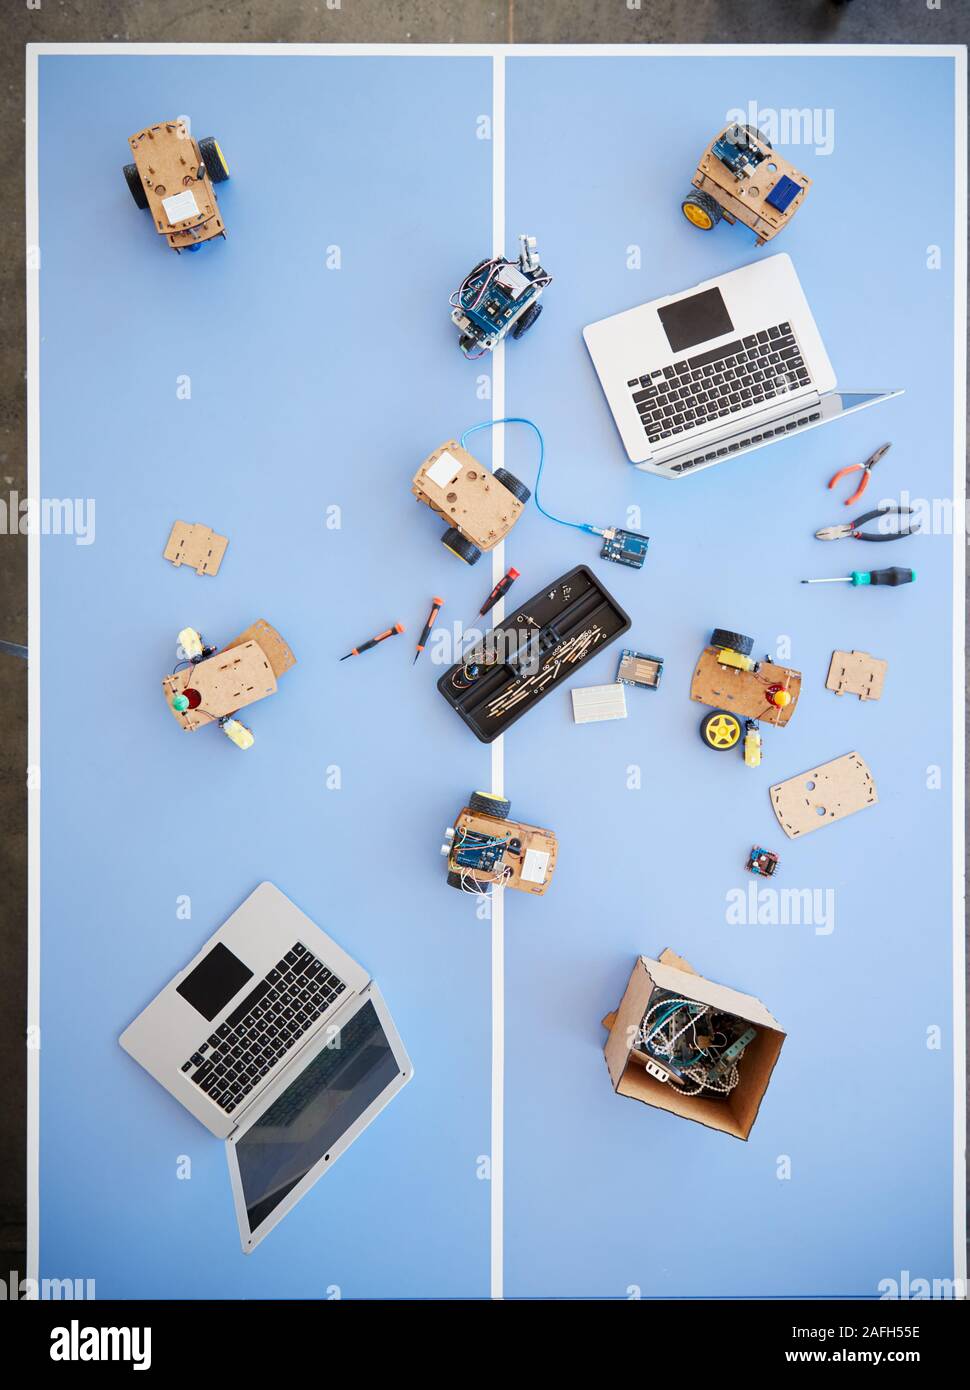 Overhead View Of Laptops And Robotic Vehicles On Table In School Computer Coding Class Stock Photo